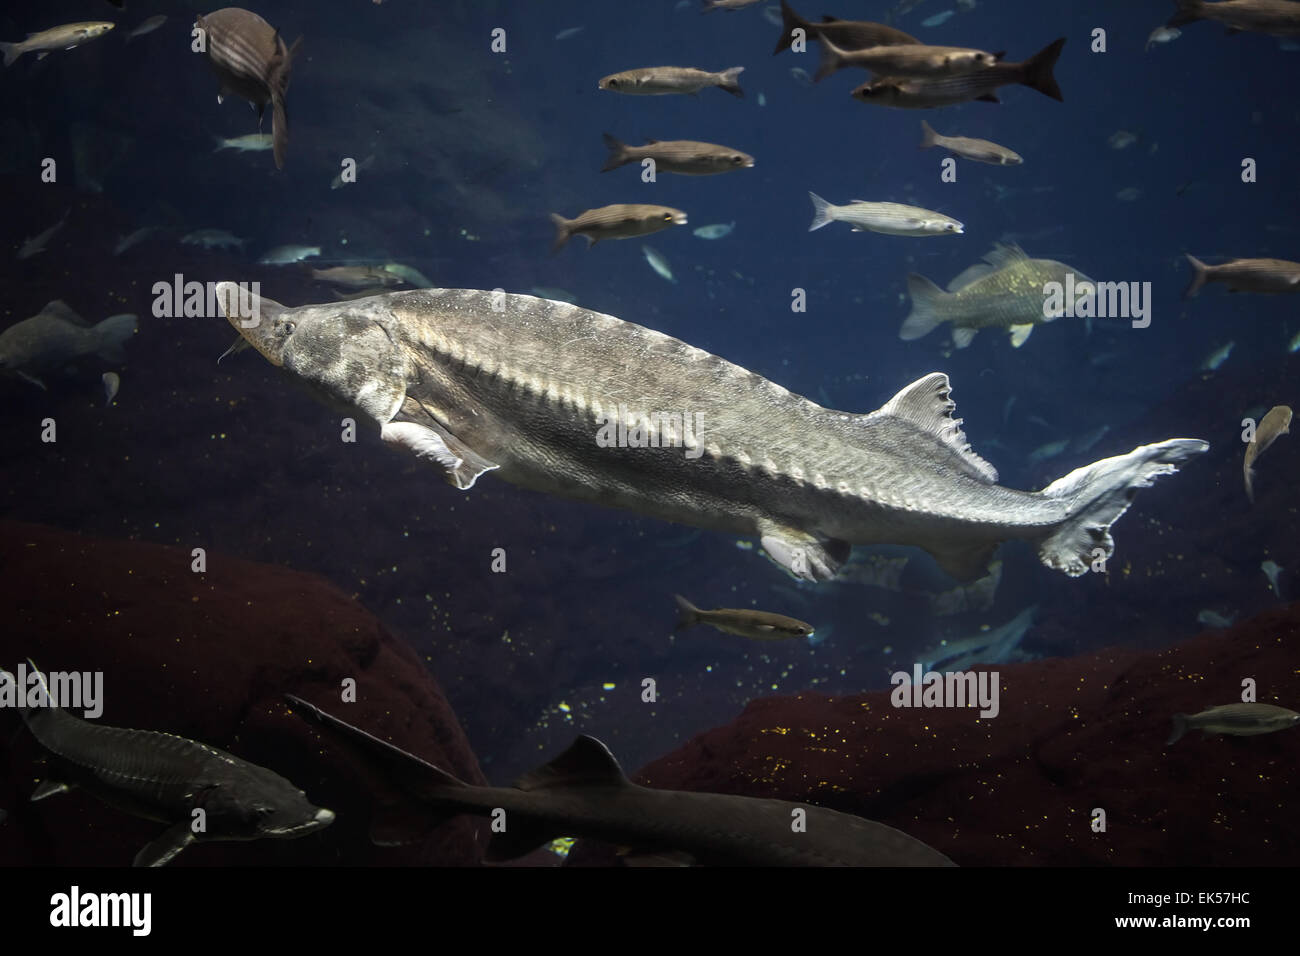 Big Atlantic sturgeon floats in deep blue salt water with other fishes, close-up photo with shallow DOF Stock Photo